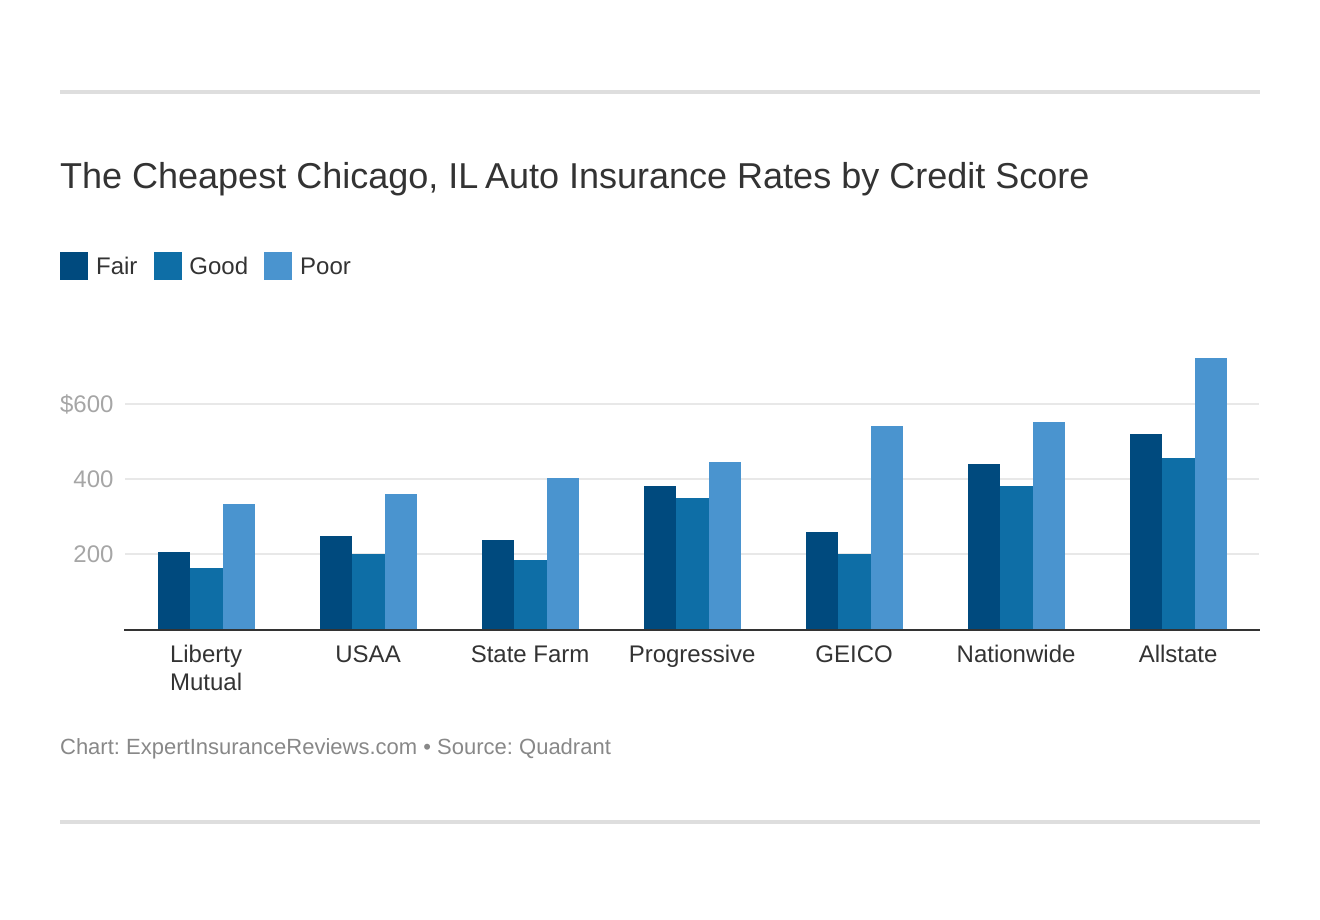 The Cheapest Chicago, IL Auto Insurance Rates by Credit Score